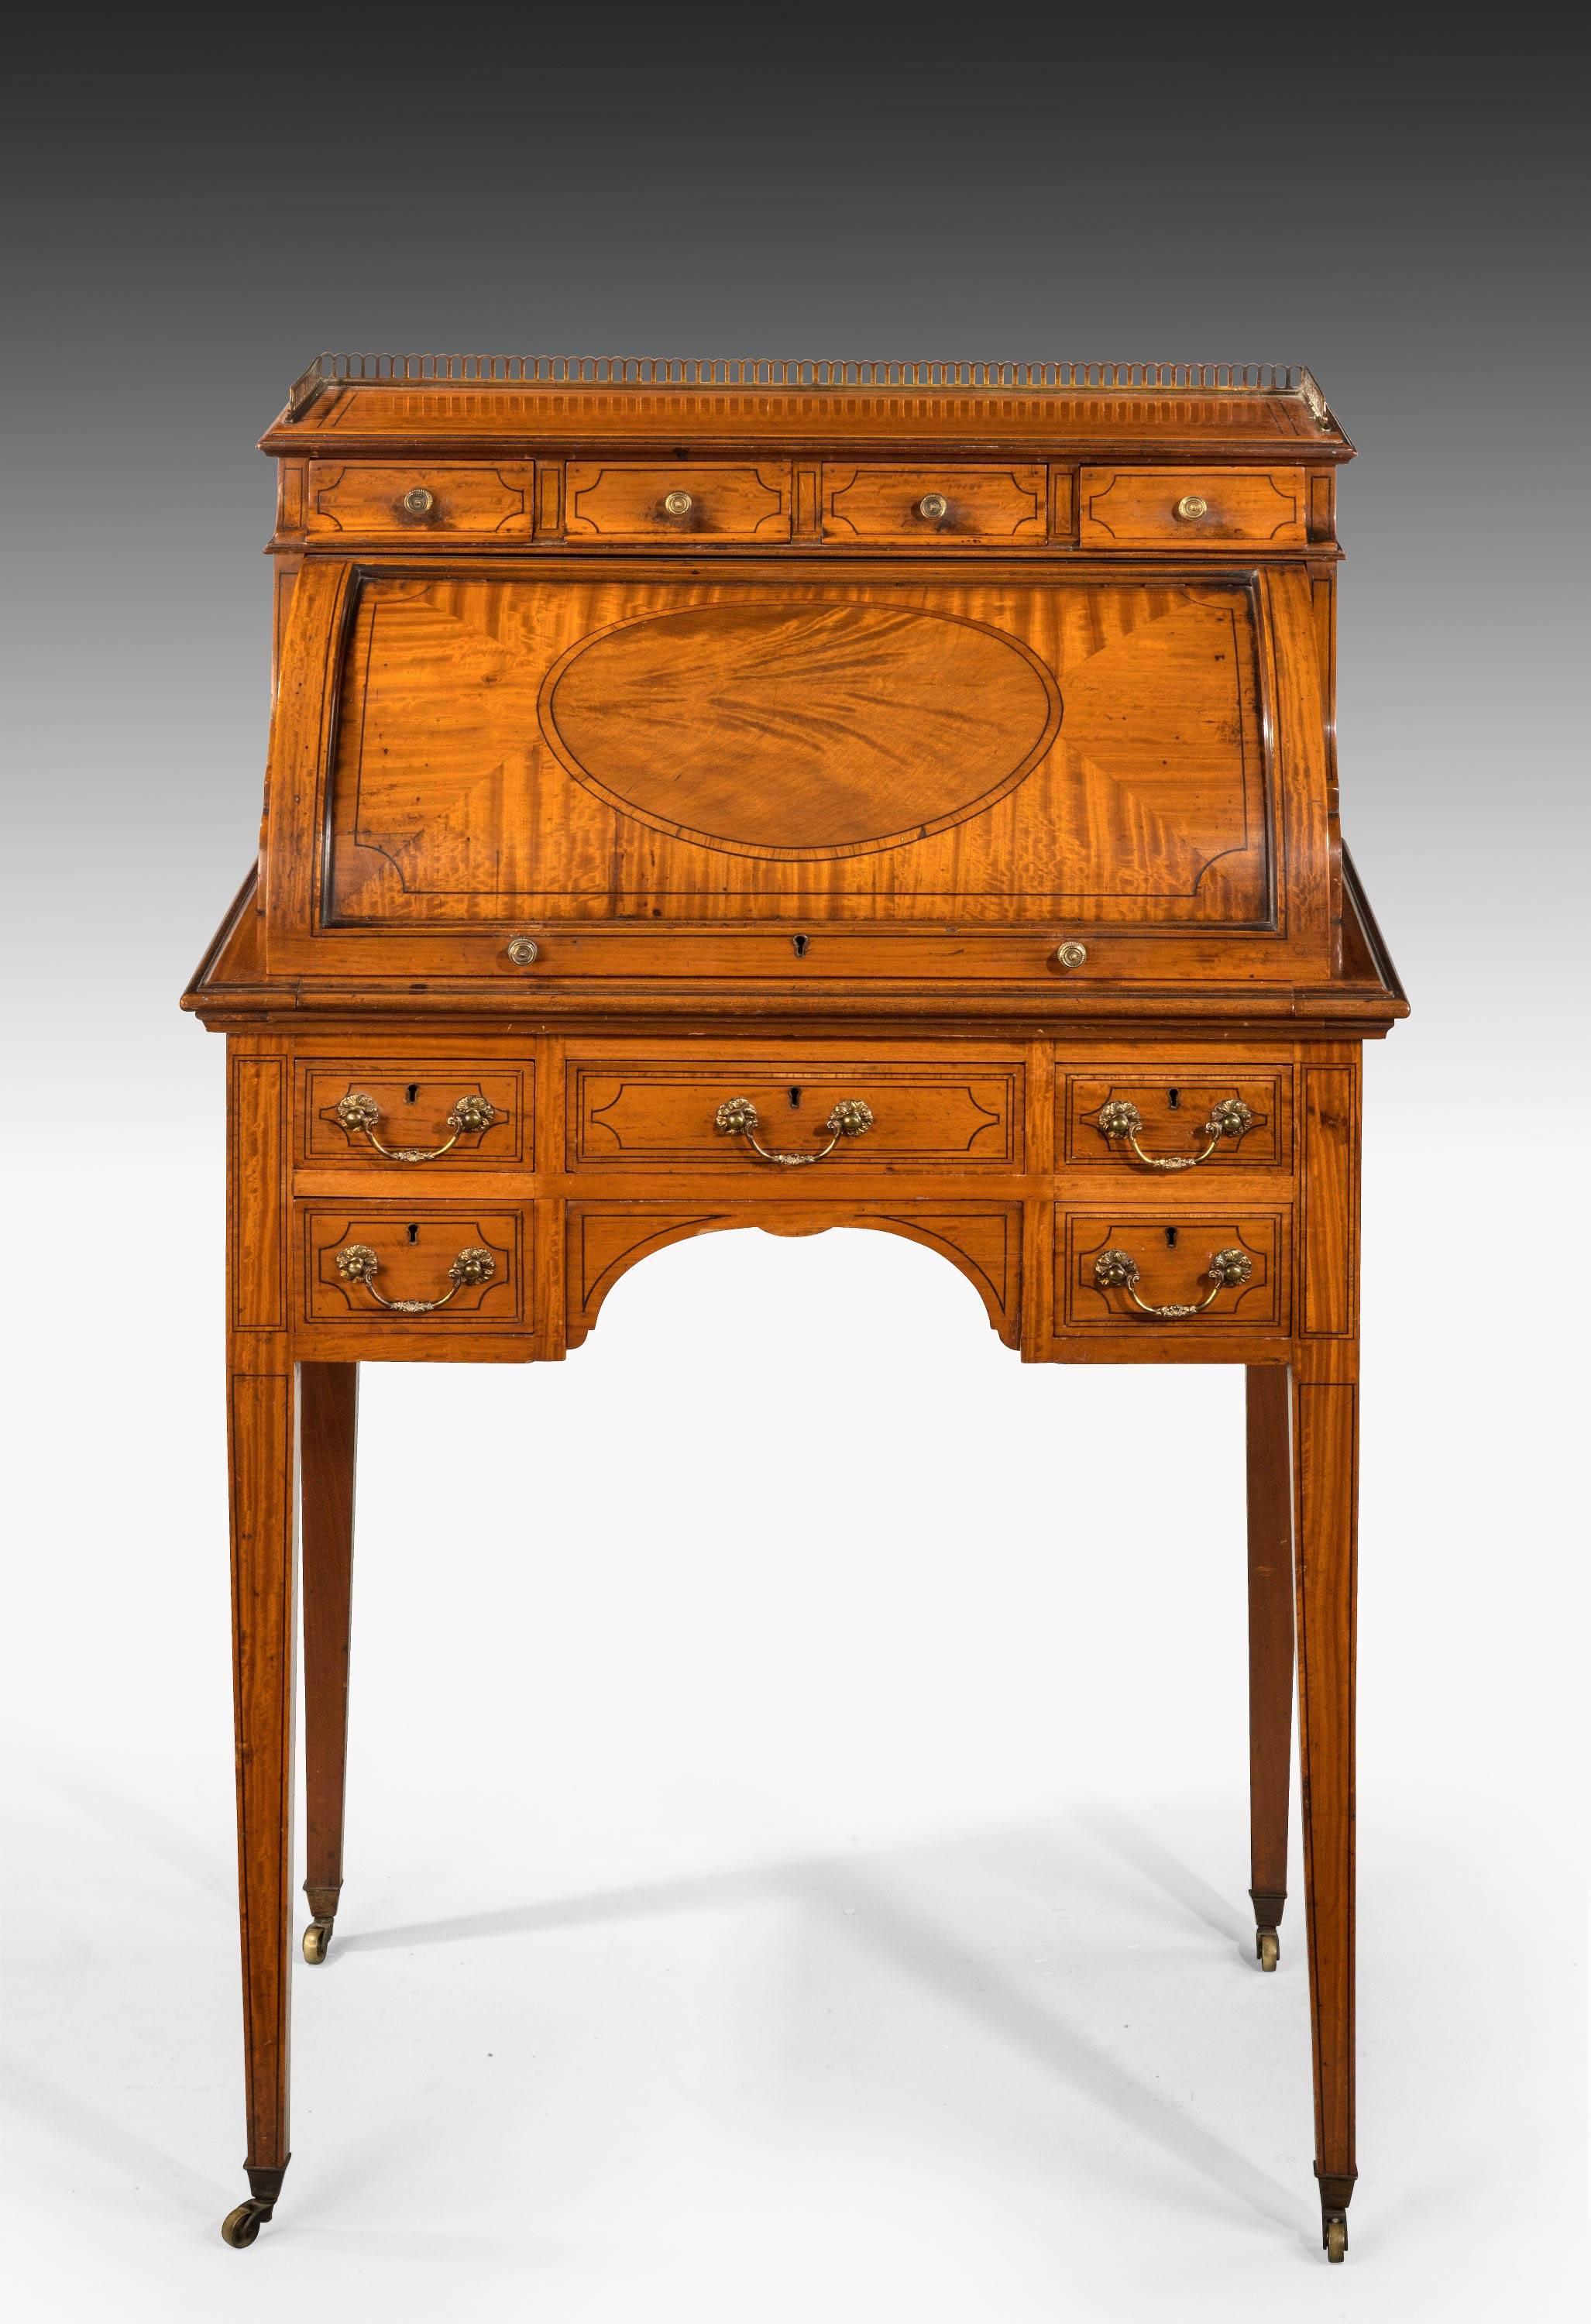 A good Edwardian period satinwood and mahogany ladies cylinder bureau on square tapering supports. Retaining the original cast swan neck handles. The interior fitted with shelves and Pidgeon holes.